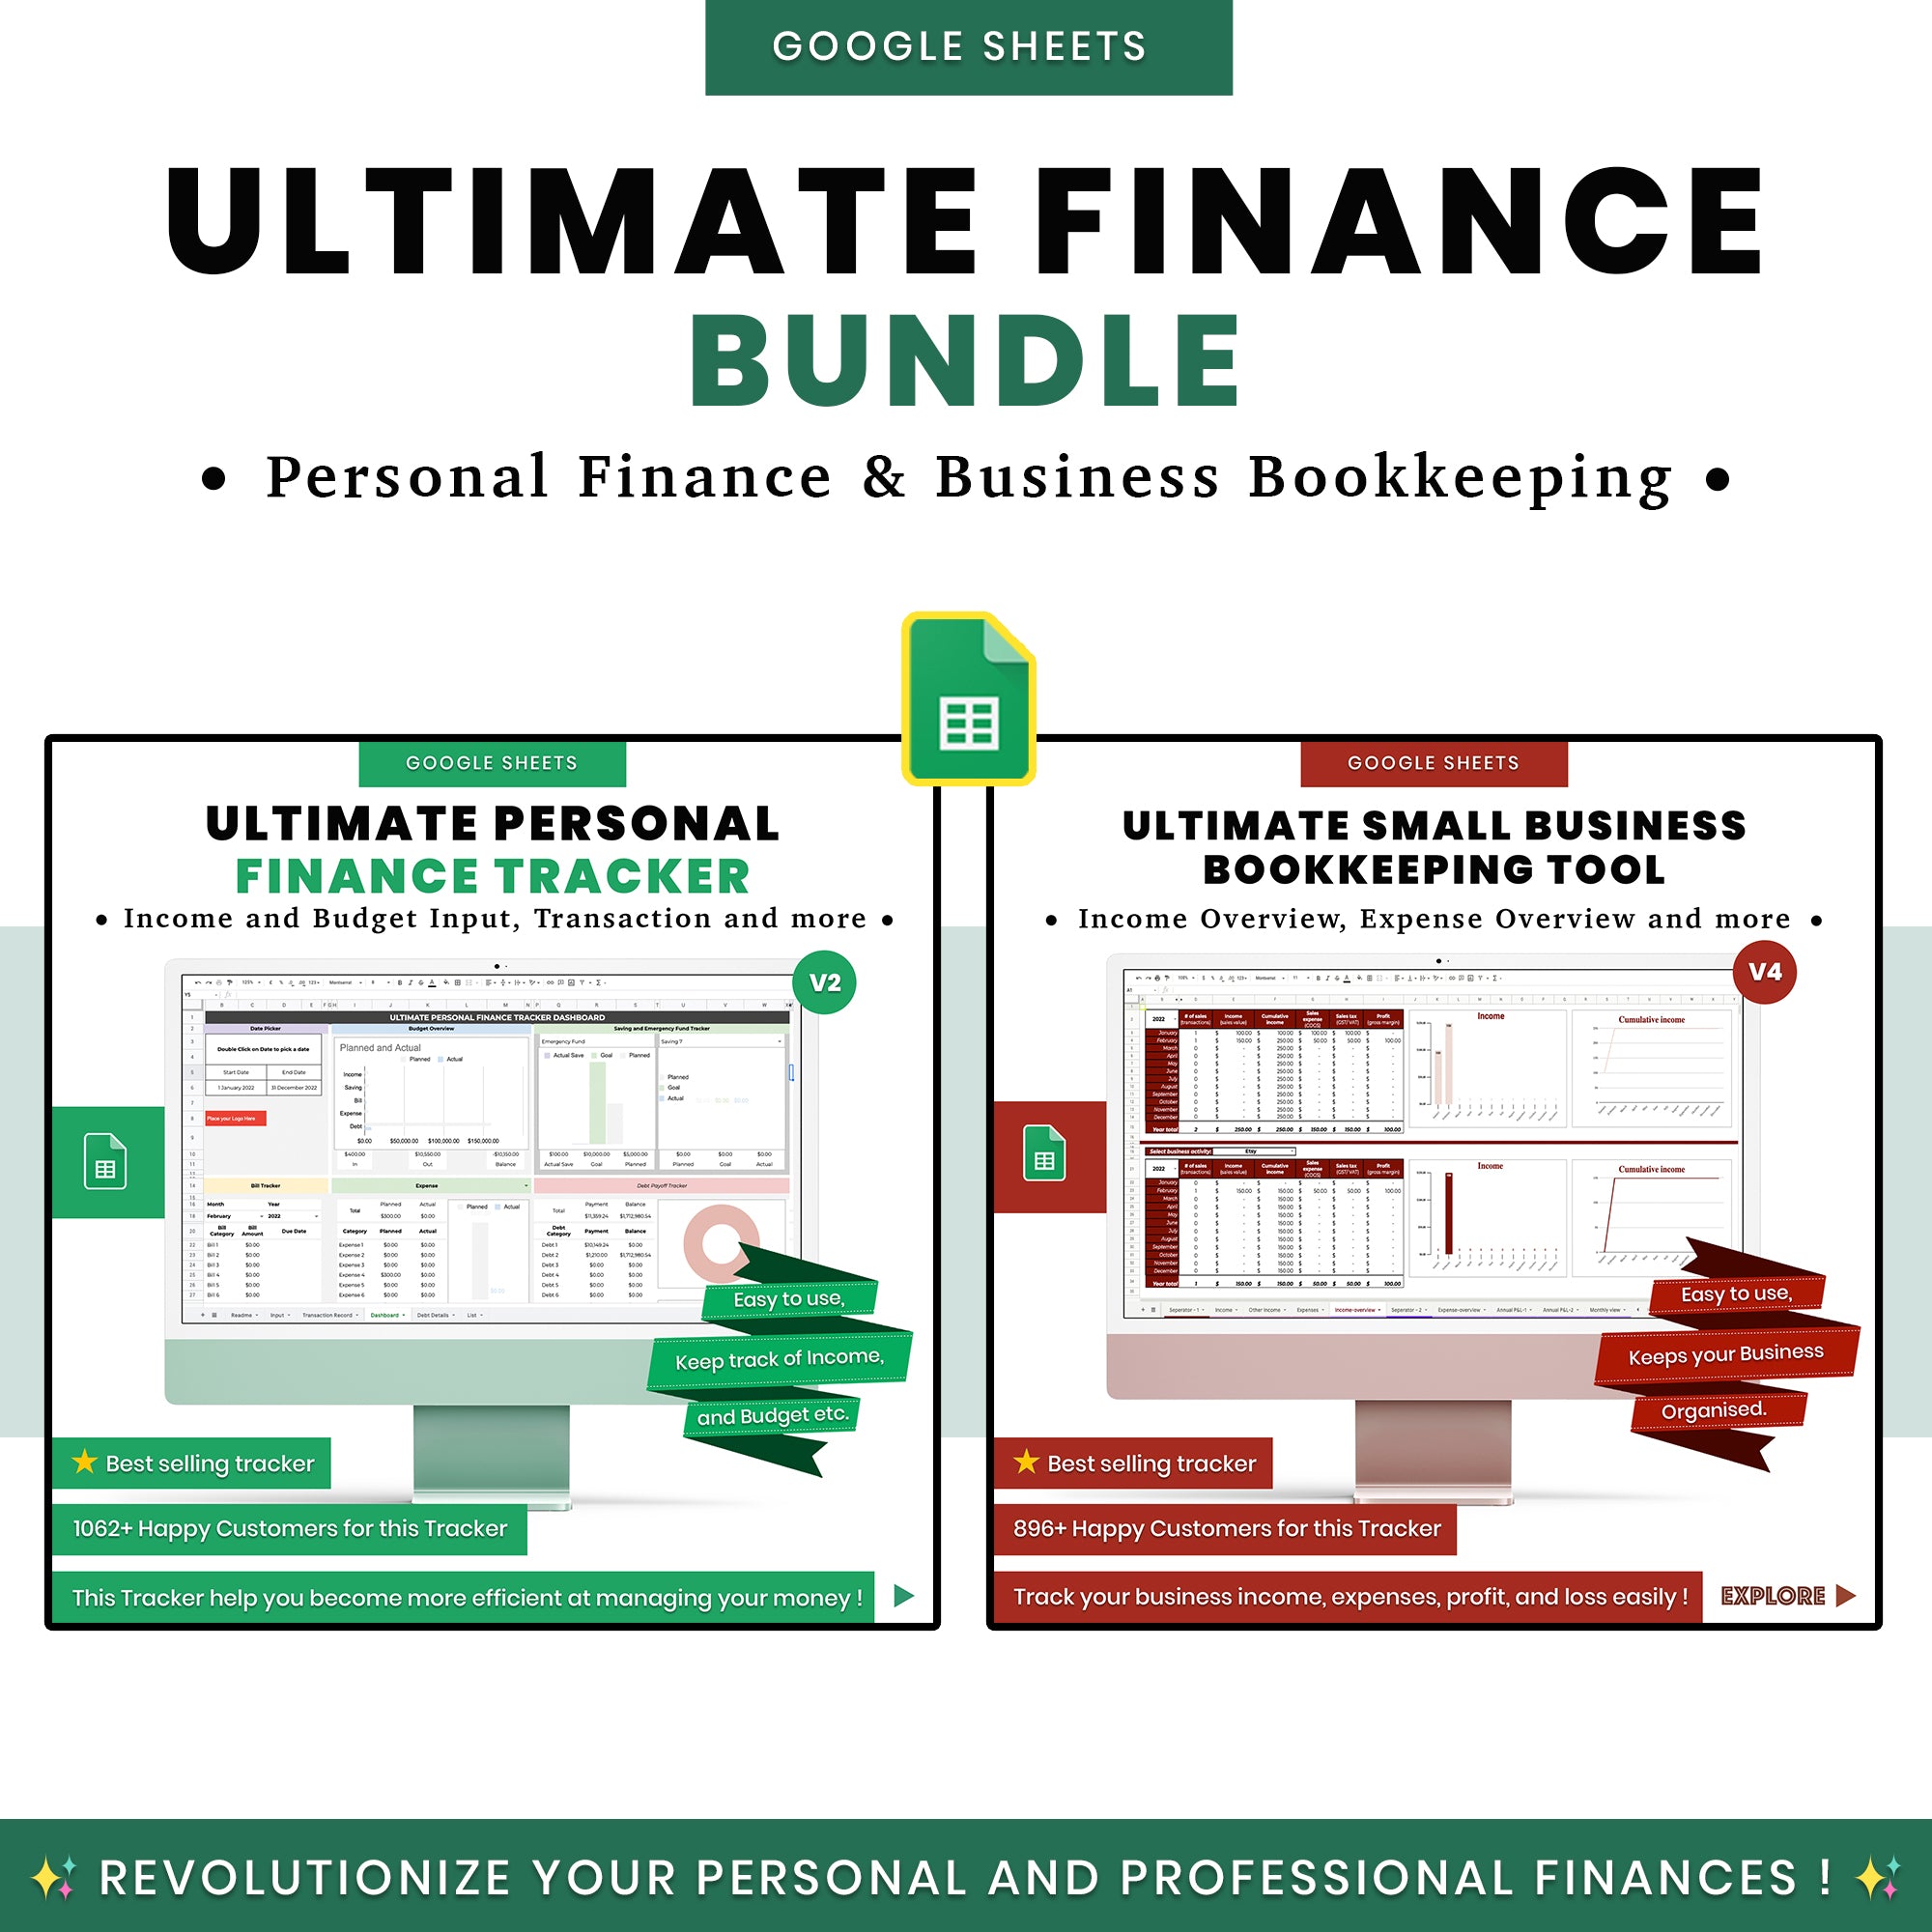 Ultimate Finance Bundle - Manage your Personal & Business Finances with this easy to use Spreadsheet Finance Tracker.